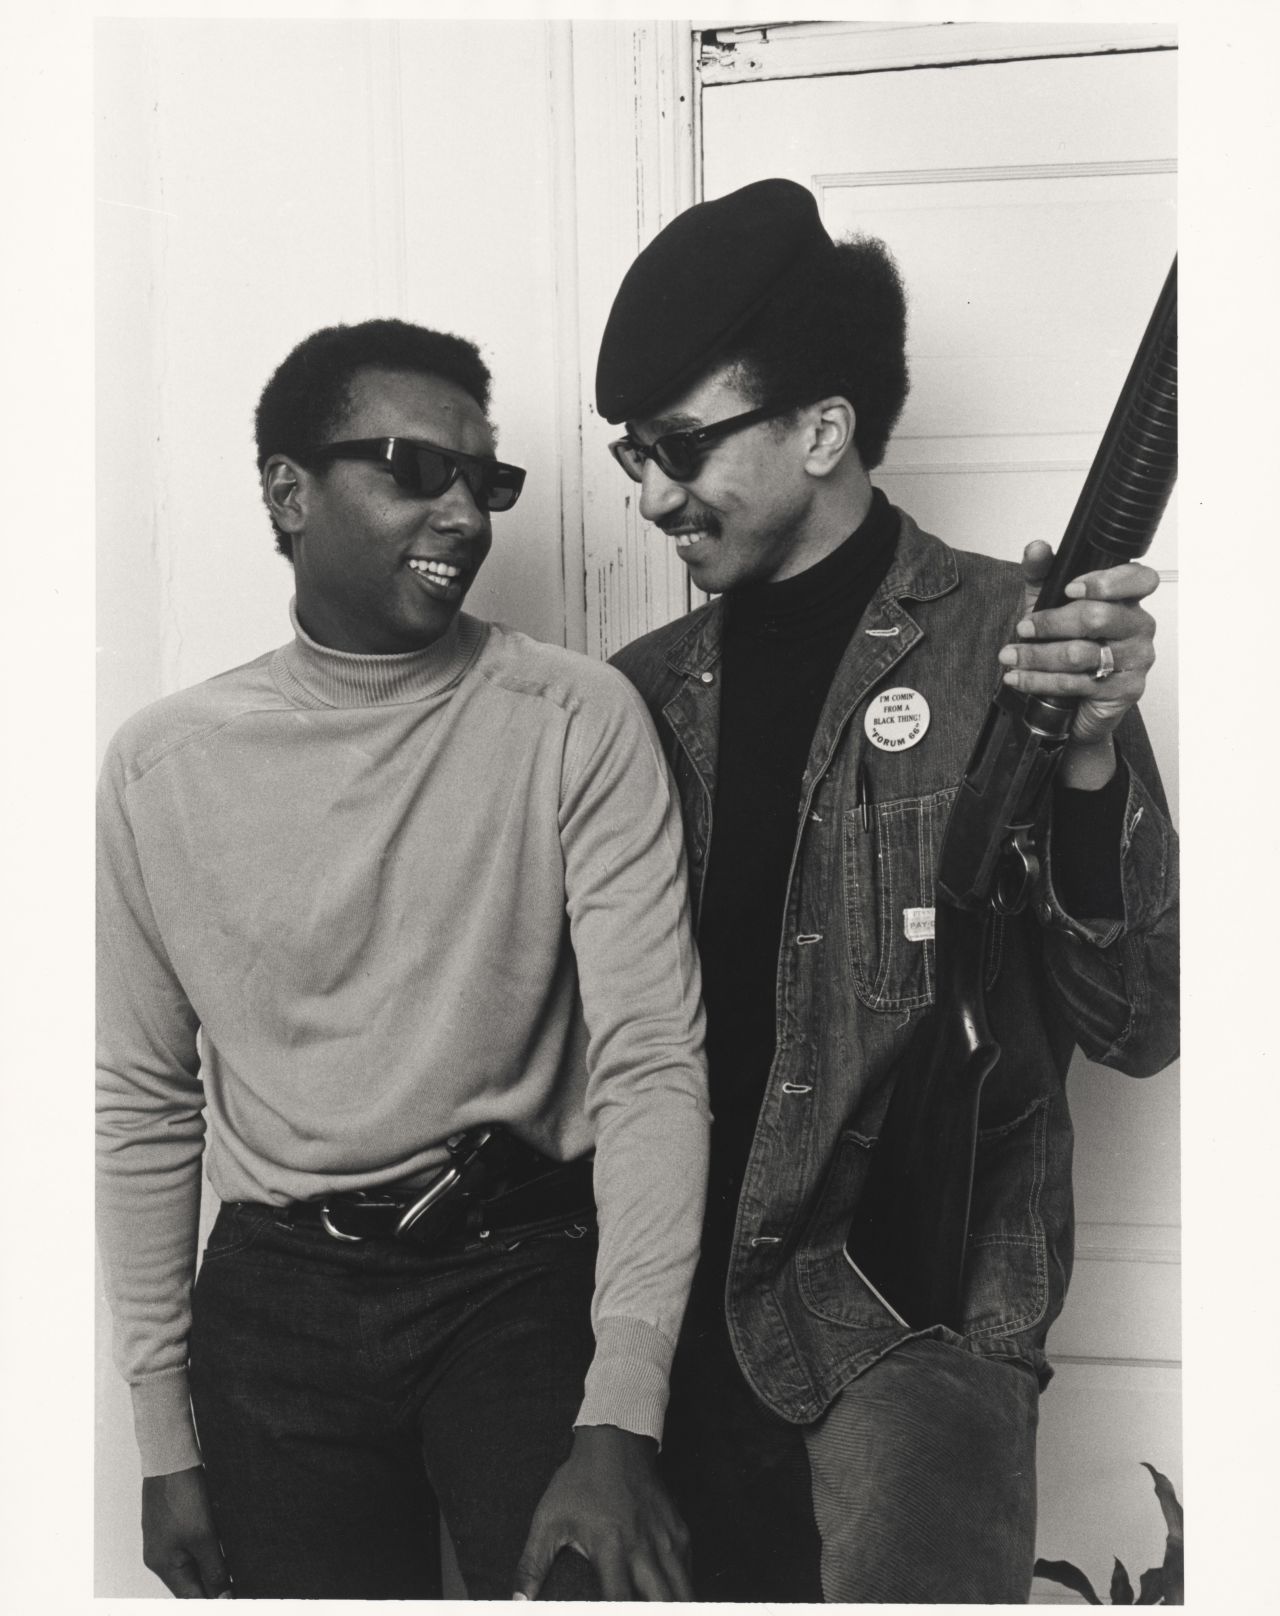 "Stokely  Carmichael  and  H.  Rap  Brown" by  James  E.  Hinton Jr.